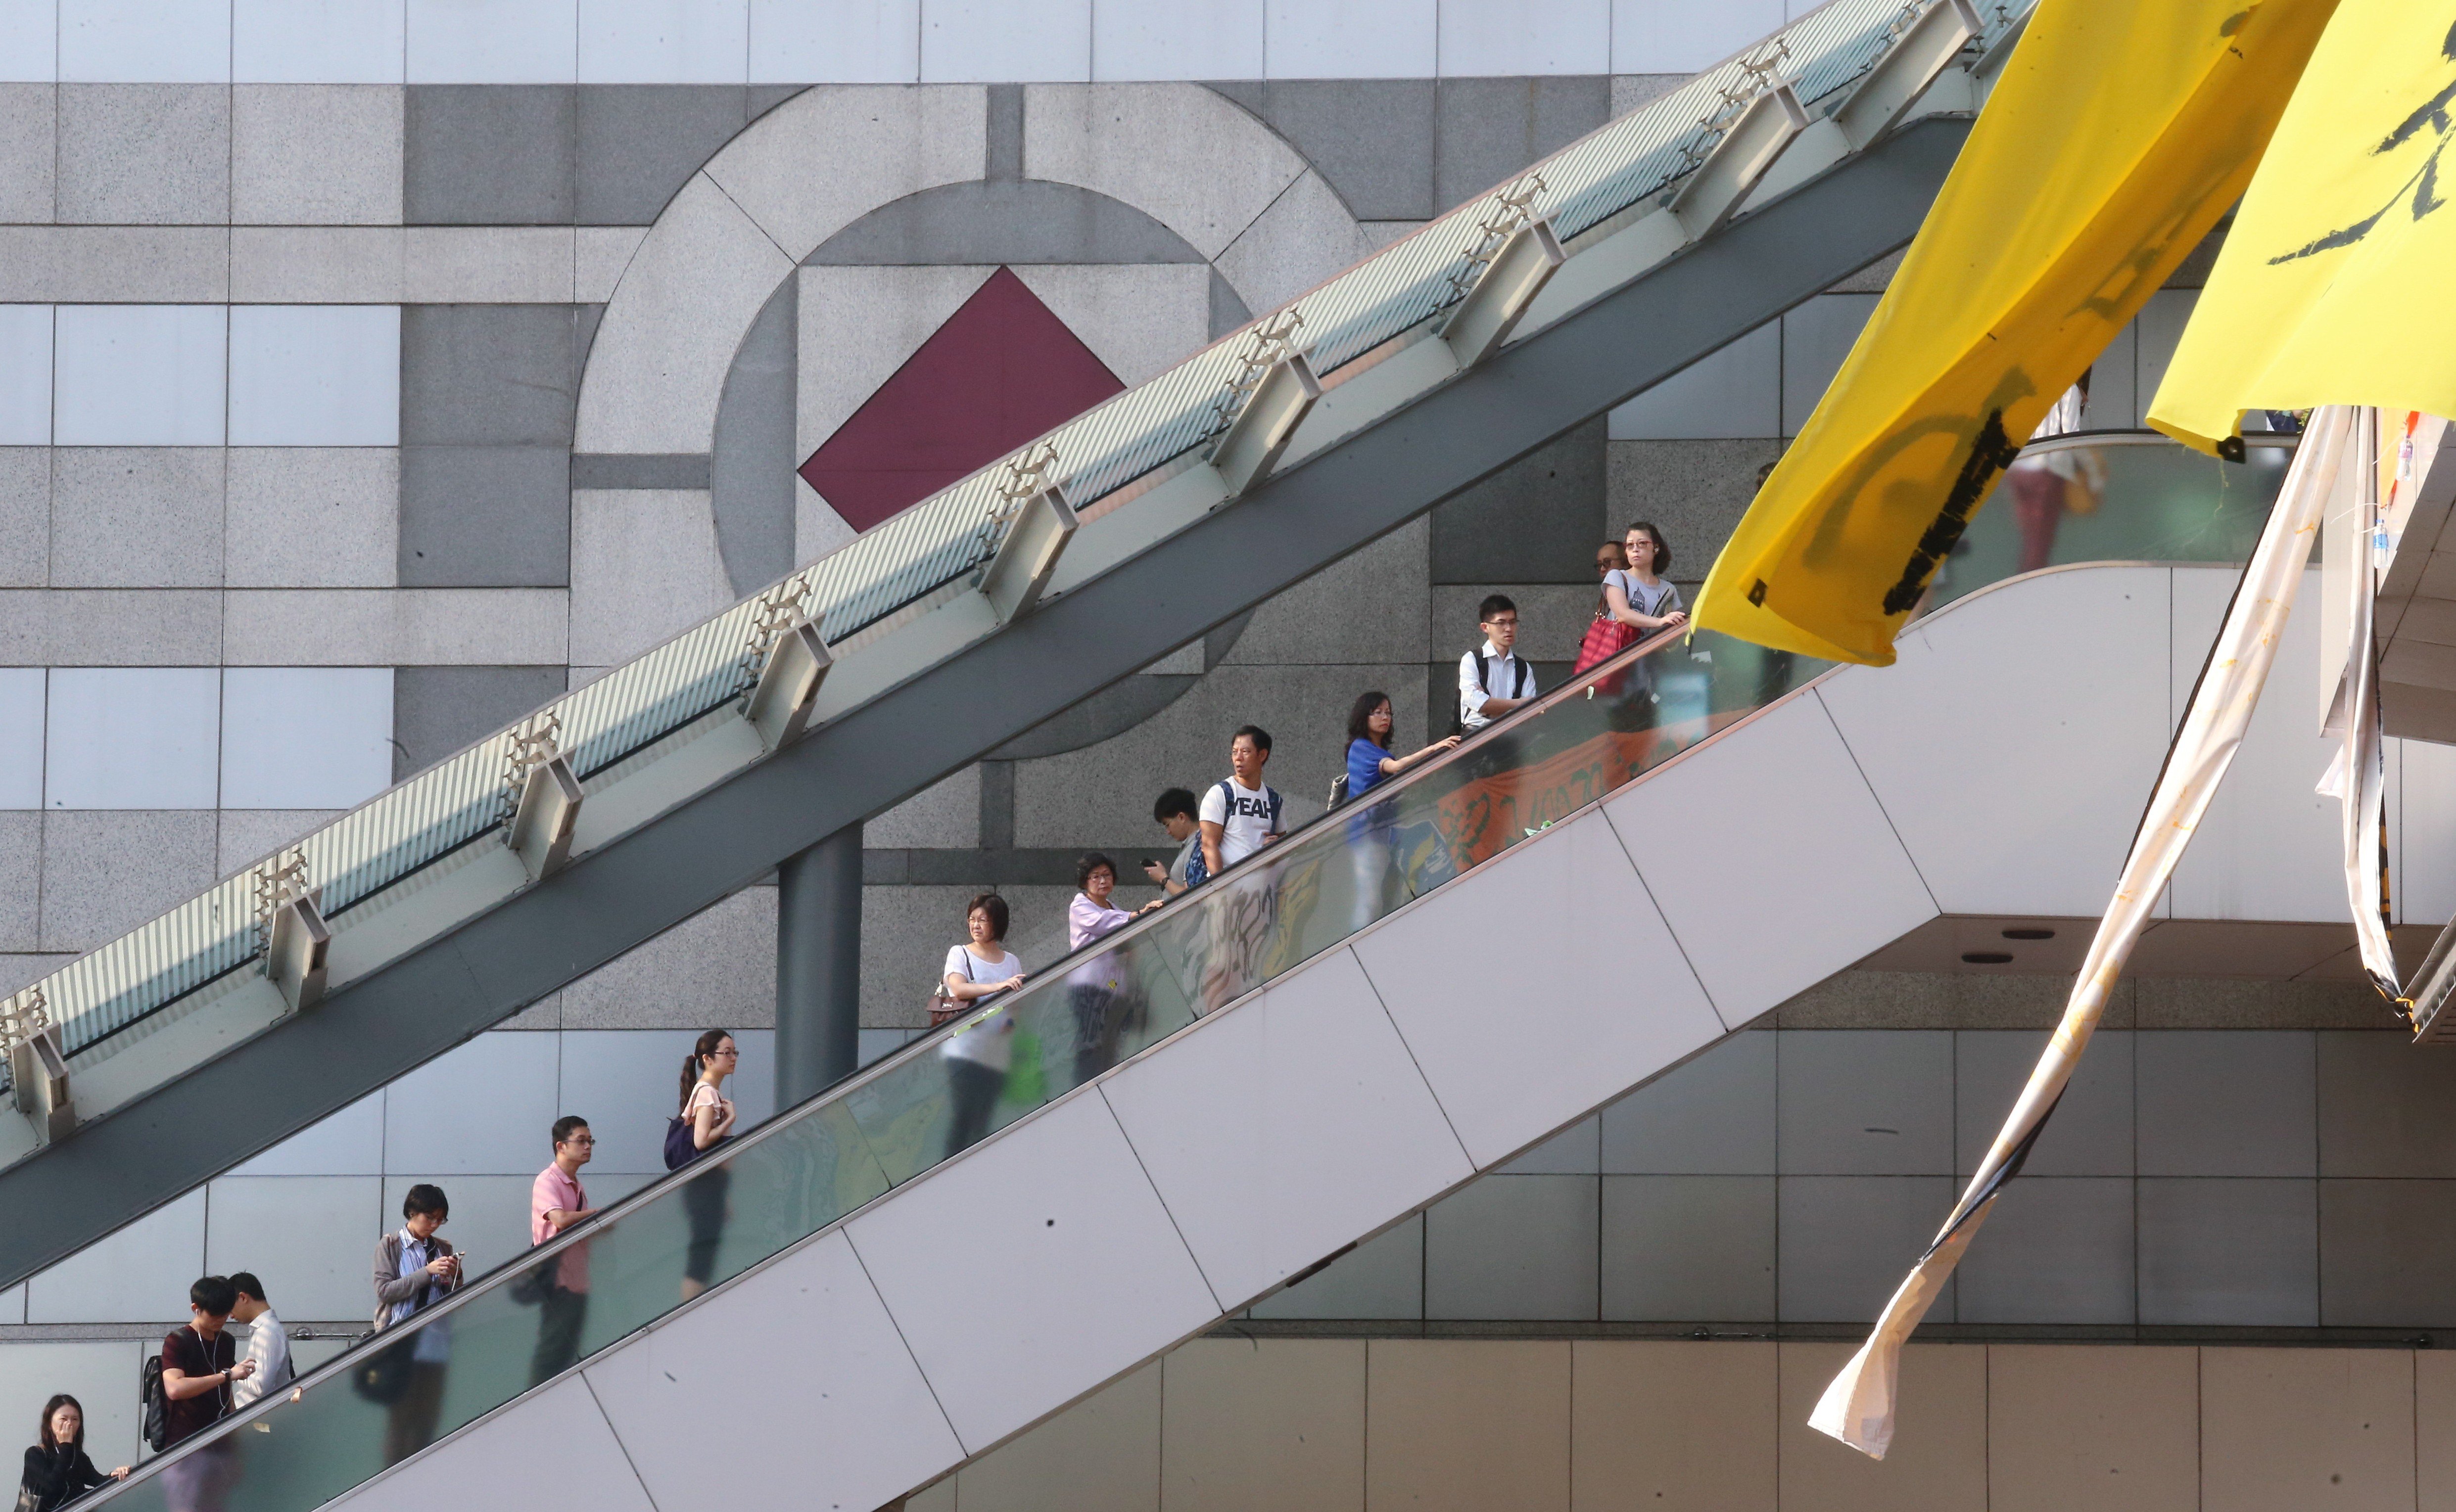 Hong Kong civil service staff enter the government headquarters in Tamar, Admiralty. Civil service unions had called for a 5 per cent pay rise across the board, citing the huge government surplus and a good economic outlook. Photo: David Wong